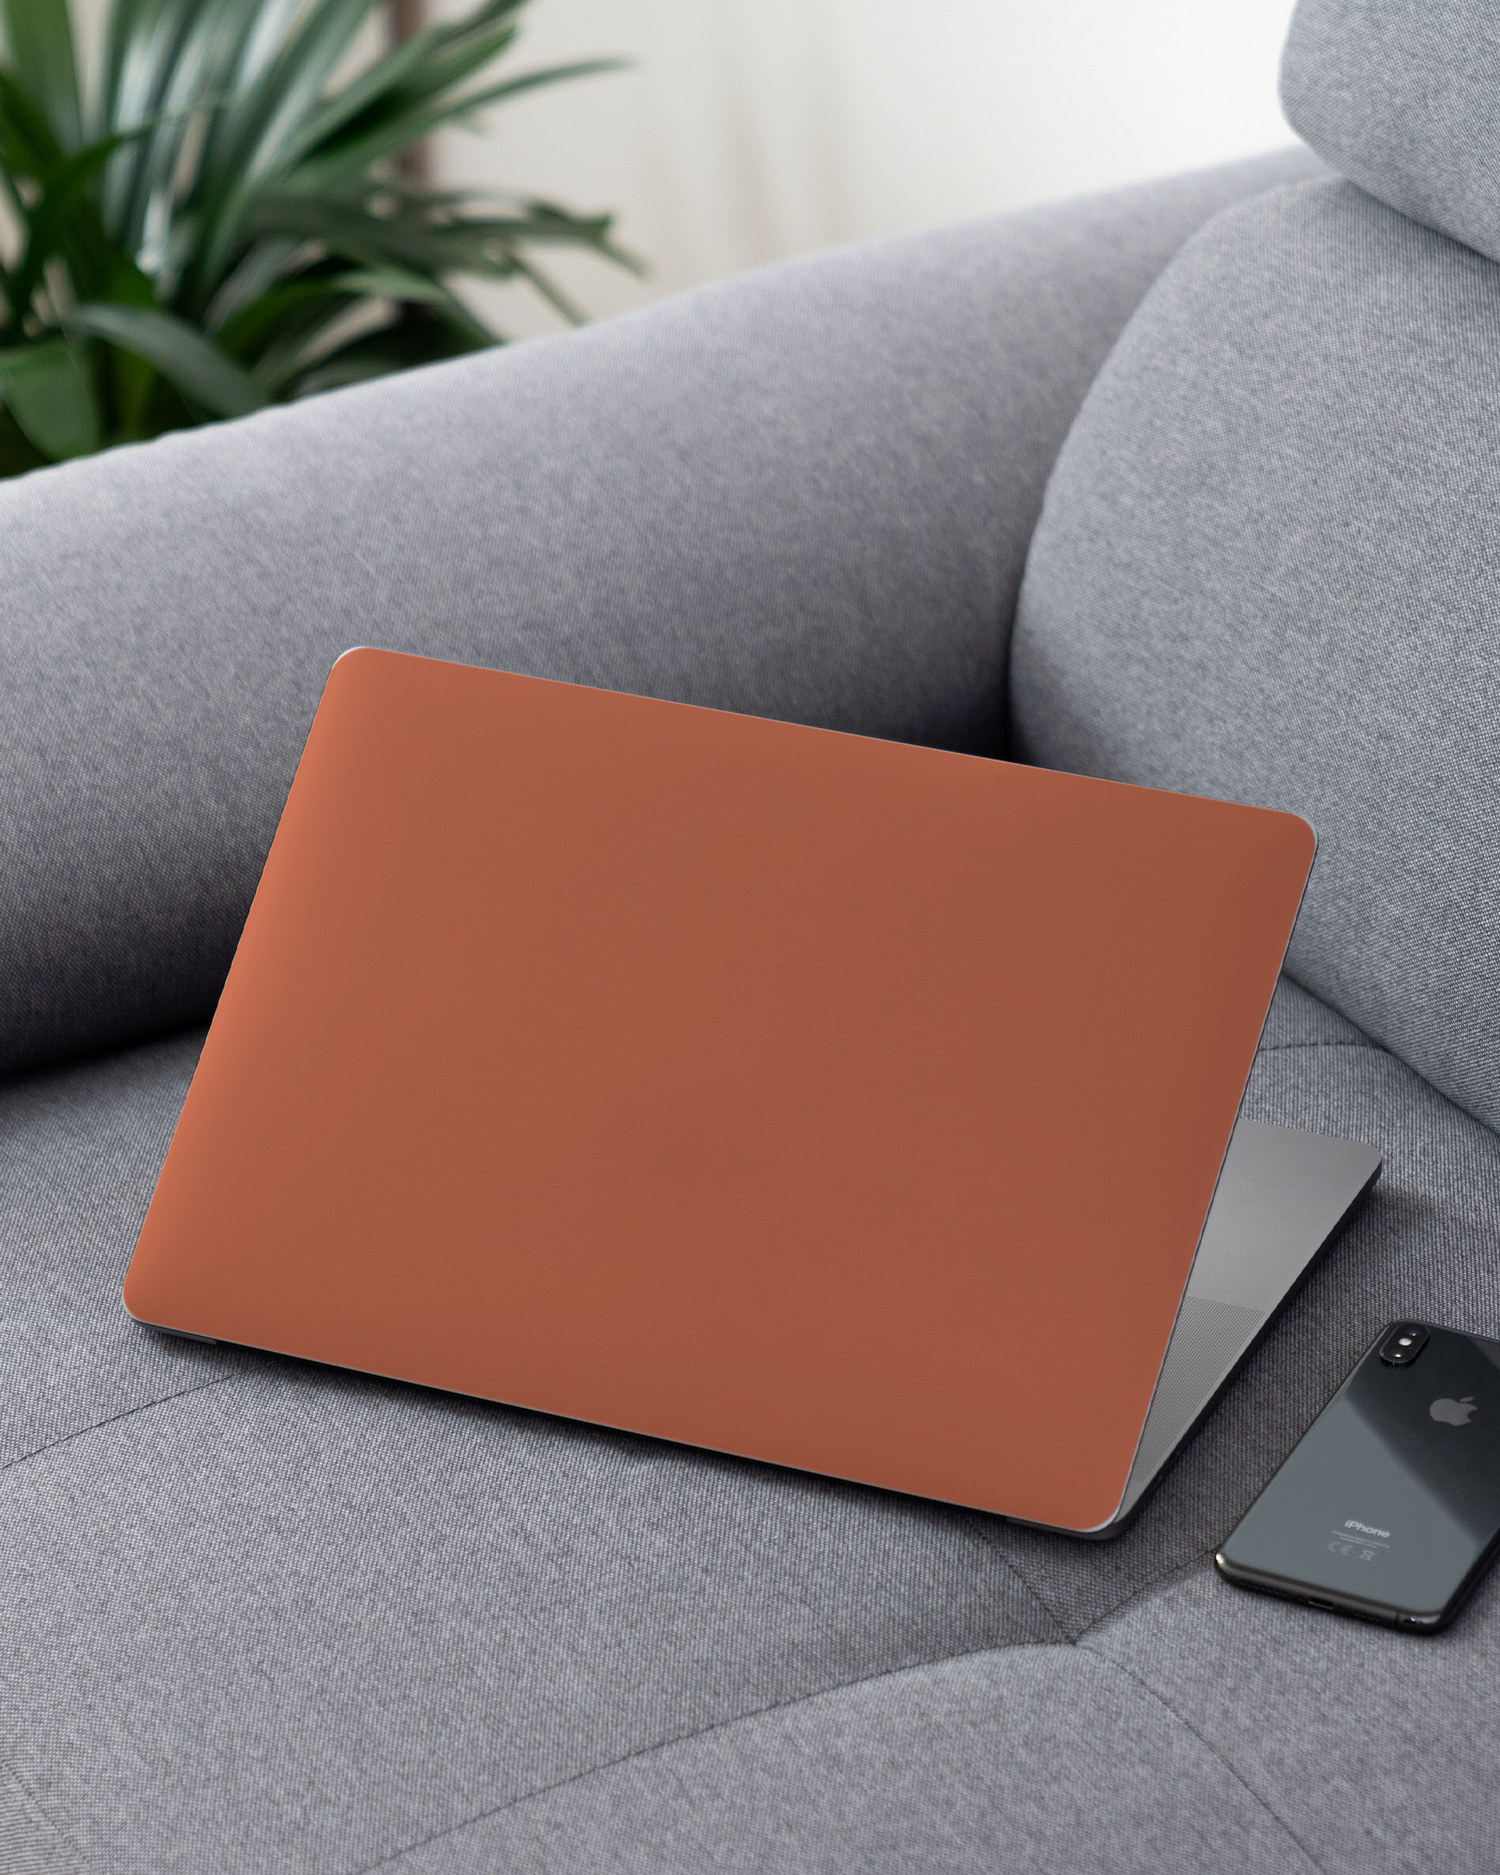 DUSTY CLAY Laptop Skin for 13 inch Apple MacBooks on a couch